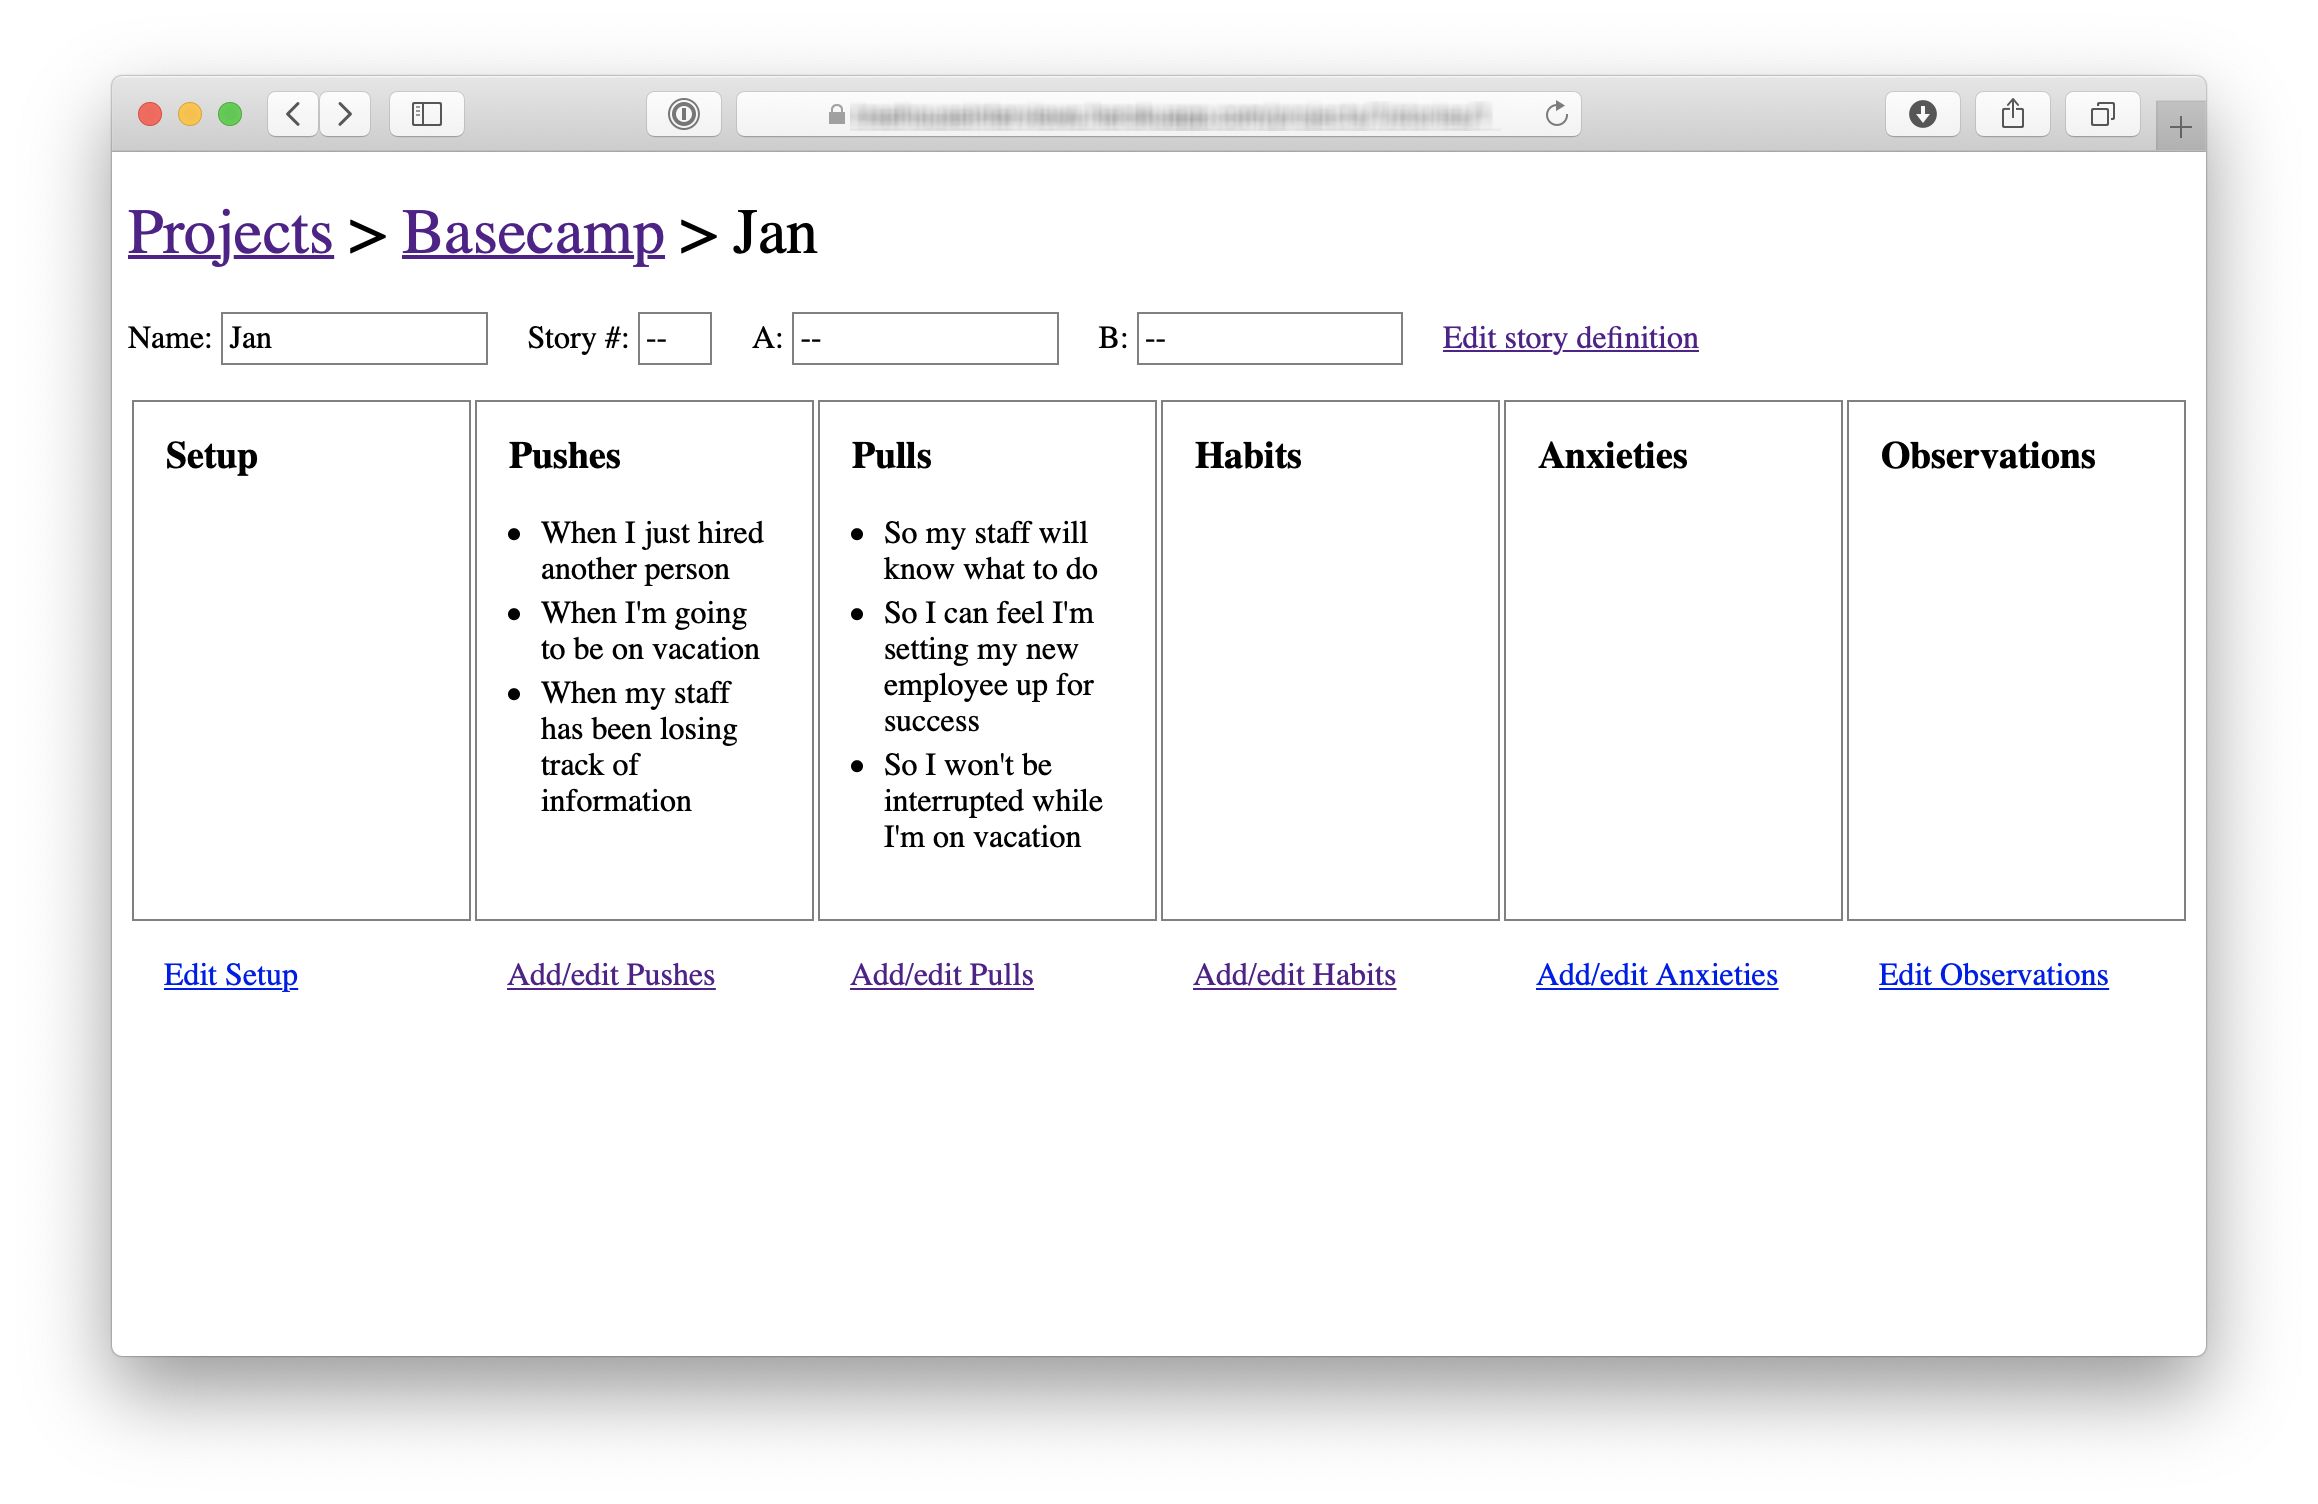 Screenshot of the interview app. A large breadcrumb at the top shows the project name (Basecamp) and the name of the interview subject (Jan). Below that there are six boxes side-by-side labeled with different categories of data to record from the interview: Setup, Pushes, Pulls, Habits, Anxities, and Observations. Below each box there is a simple text link that says add/edit. The interface is rough and unstyled.